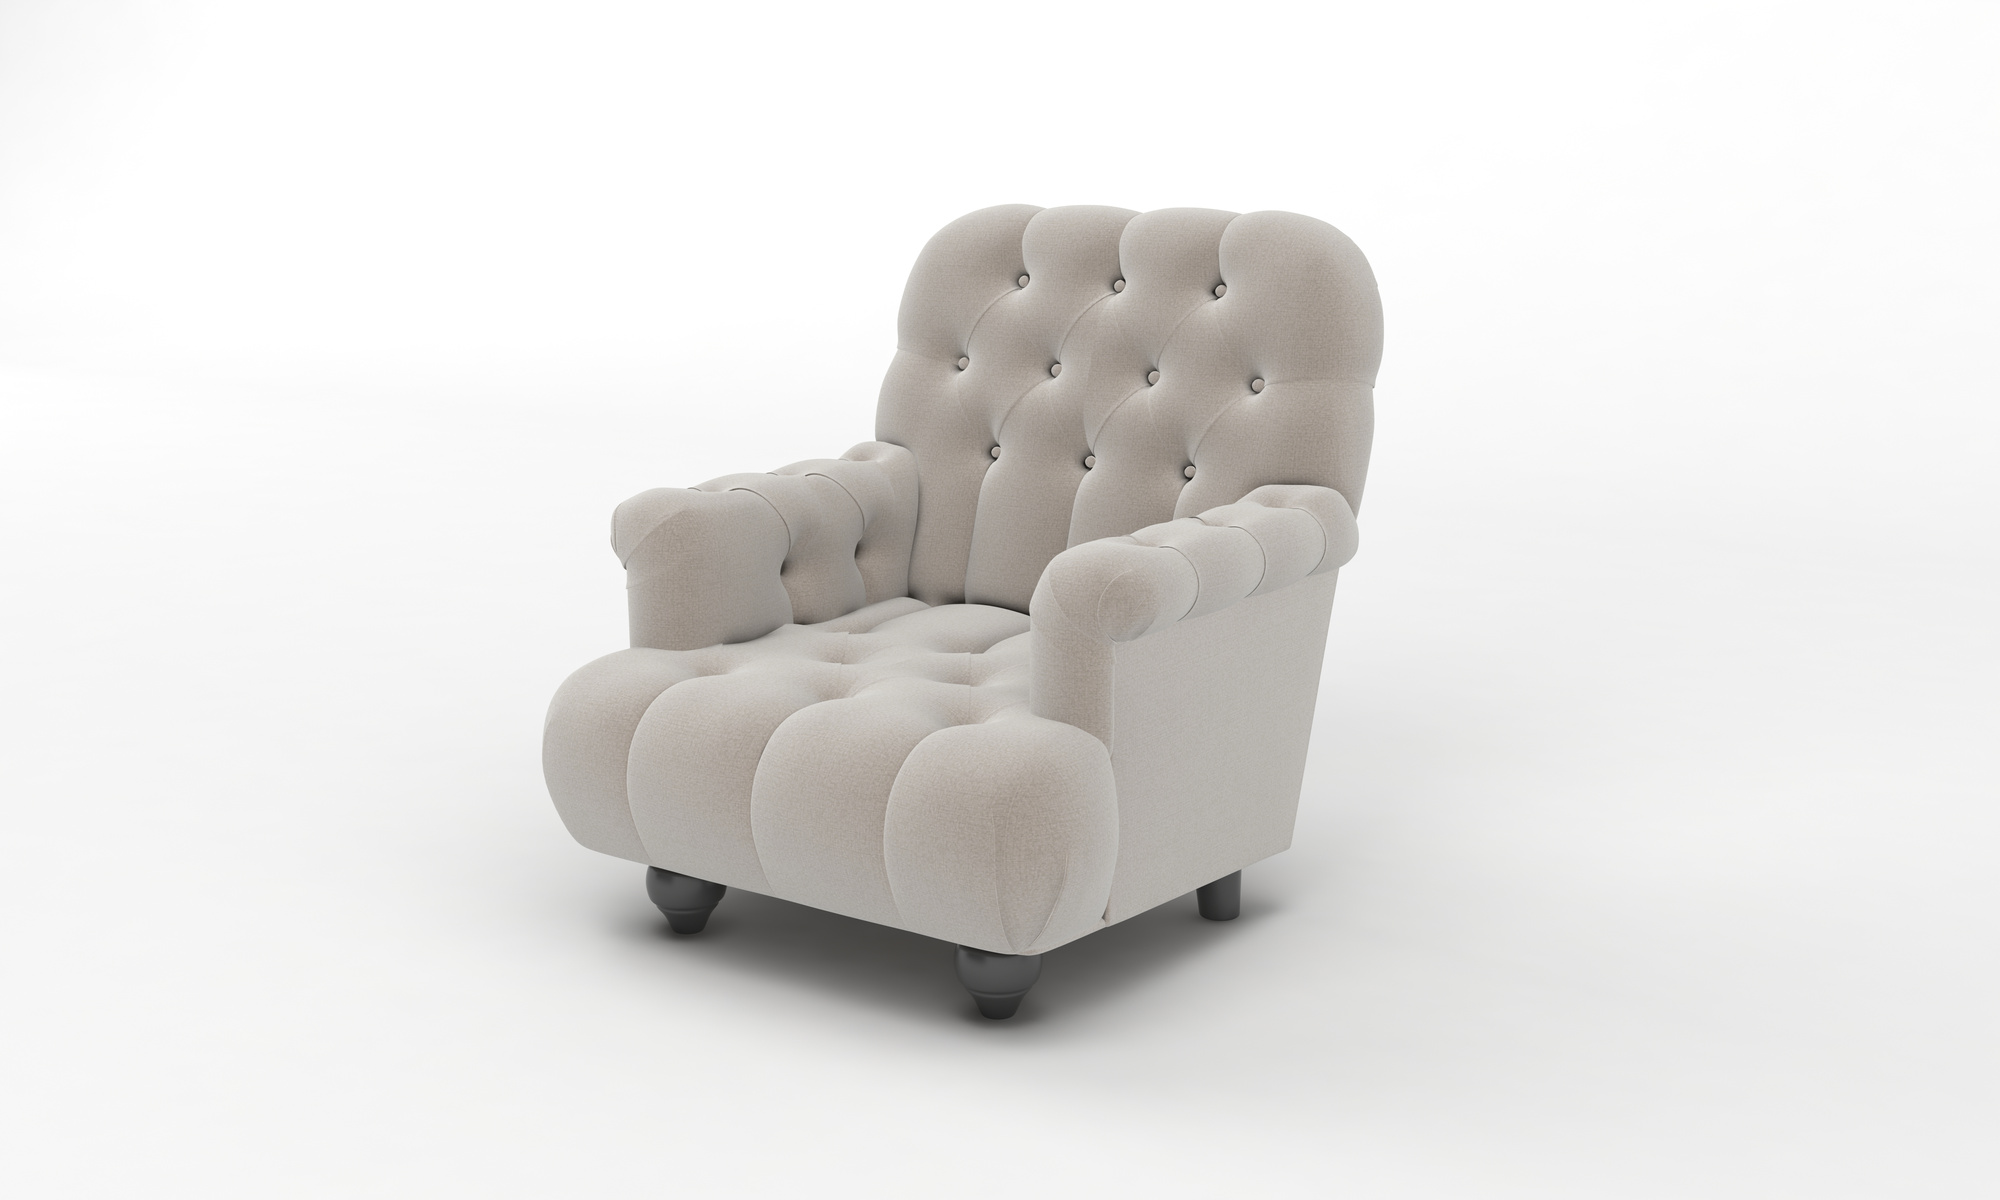 Single Sofa Chair Side View Furniture 3D Rendering